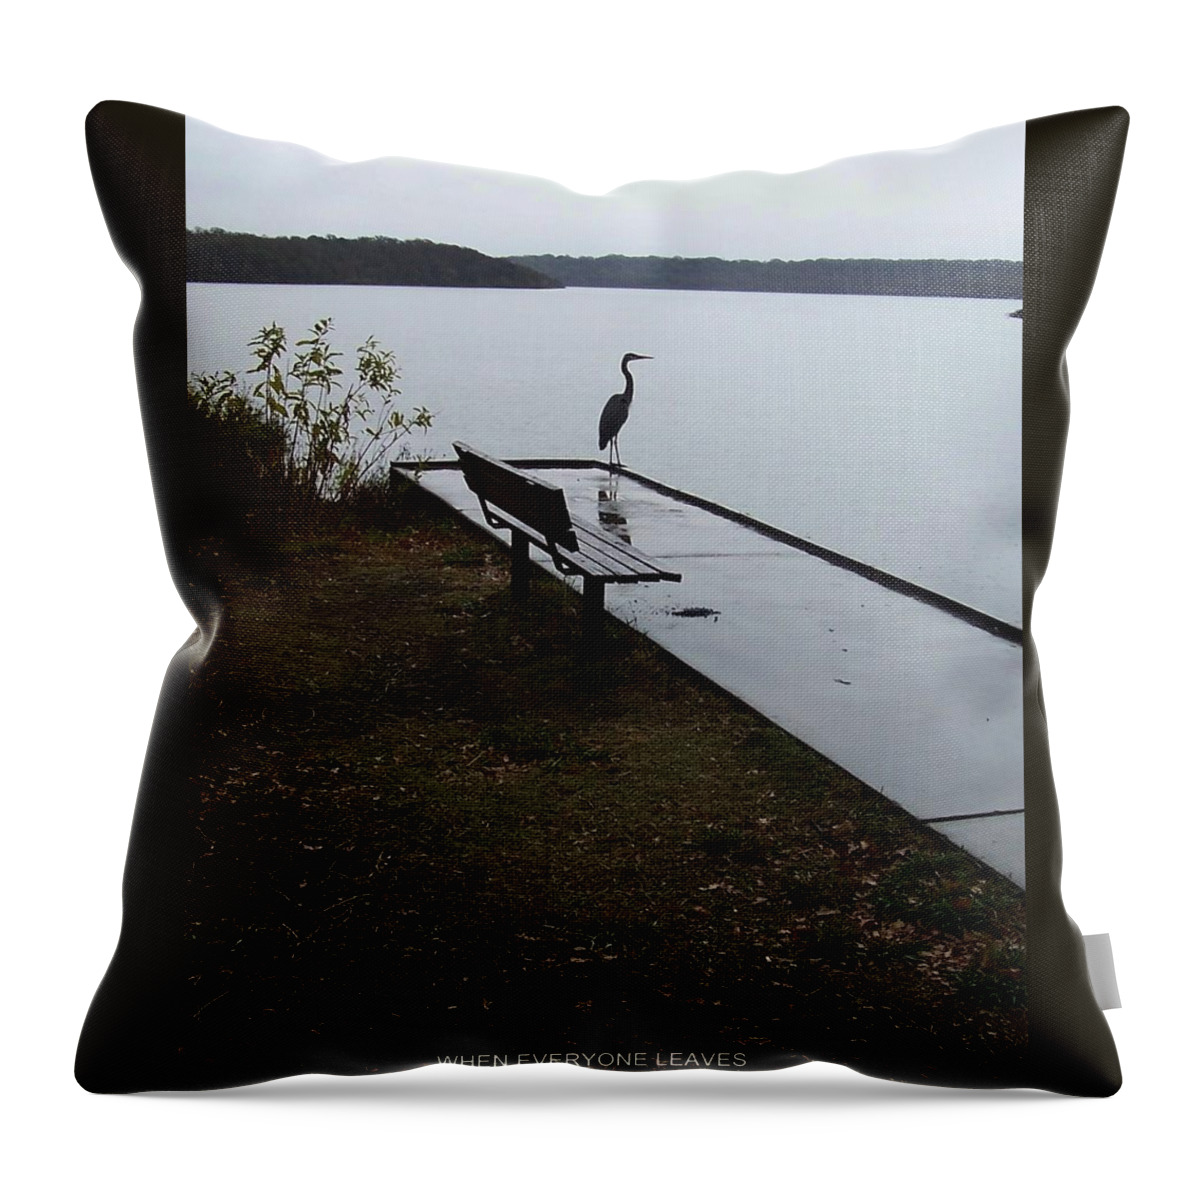 Wild Throw Pillow featuring the painting When Everyone leaves by Thomas F Kennedy